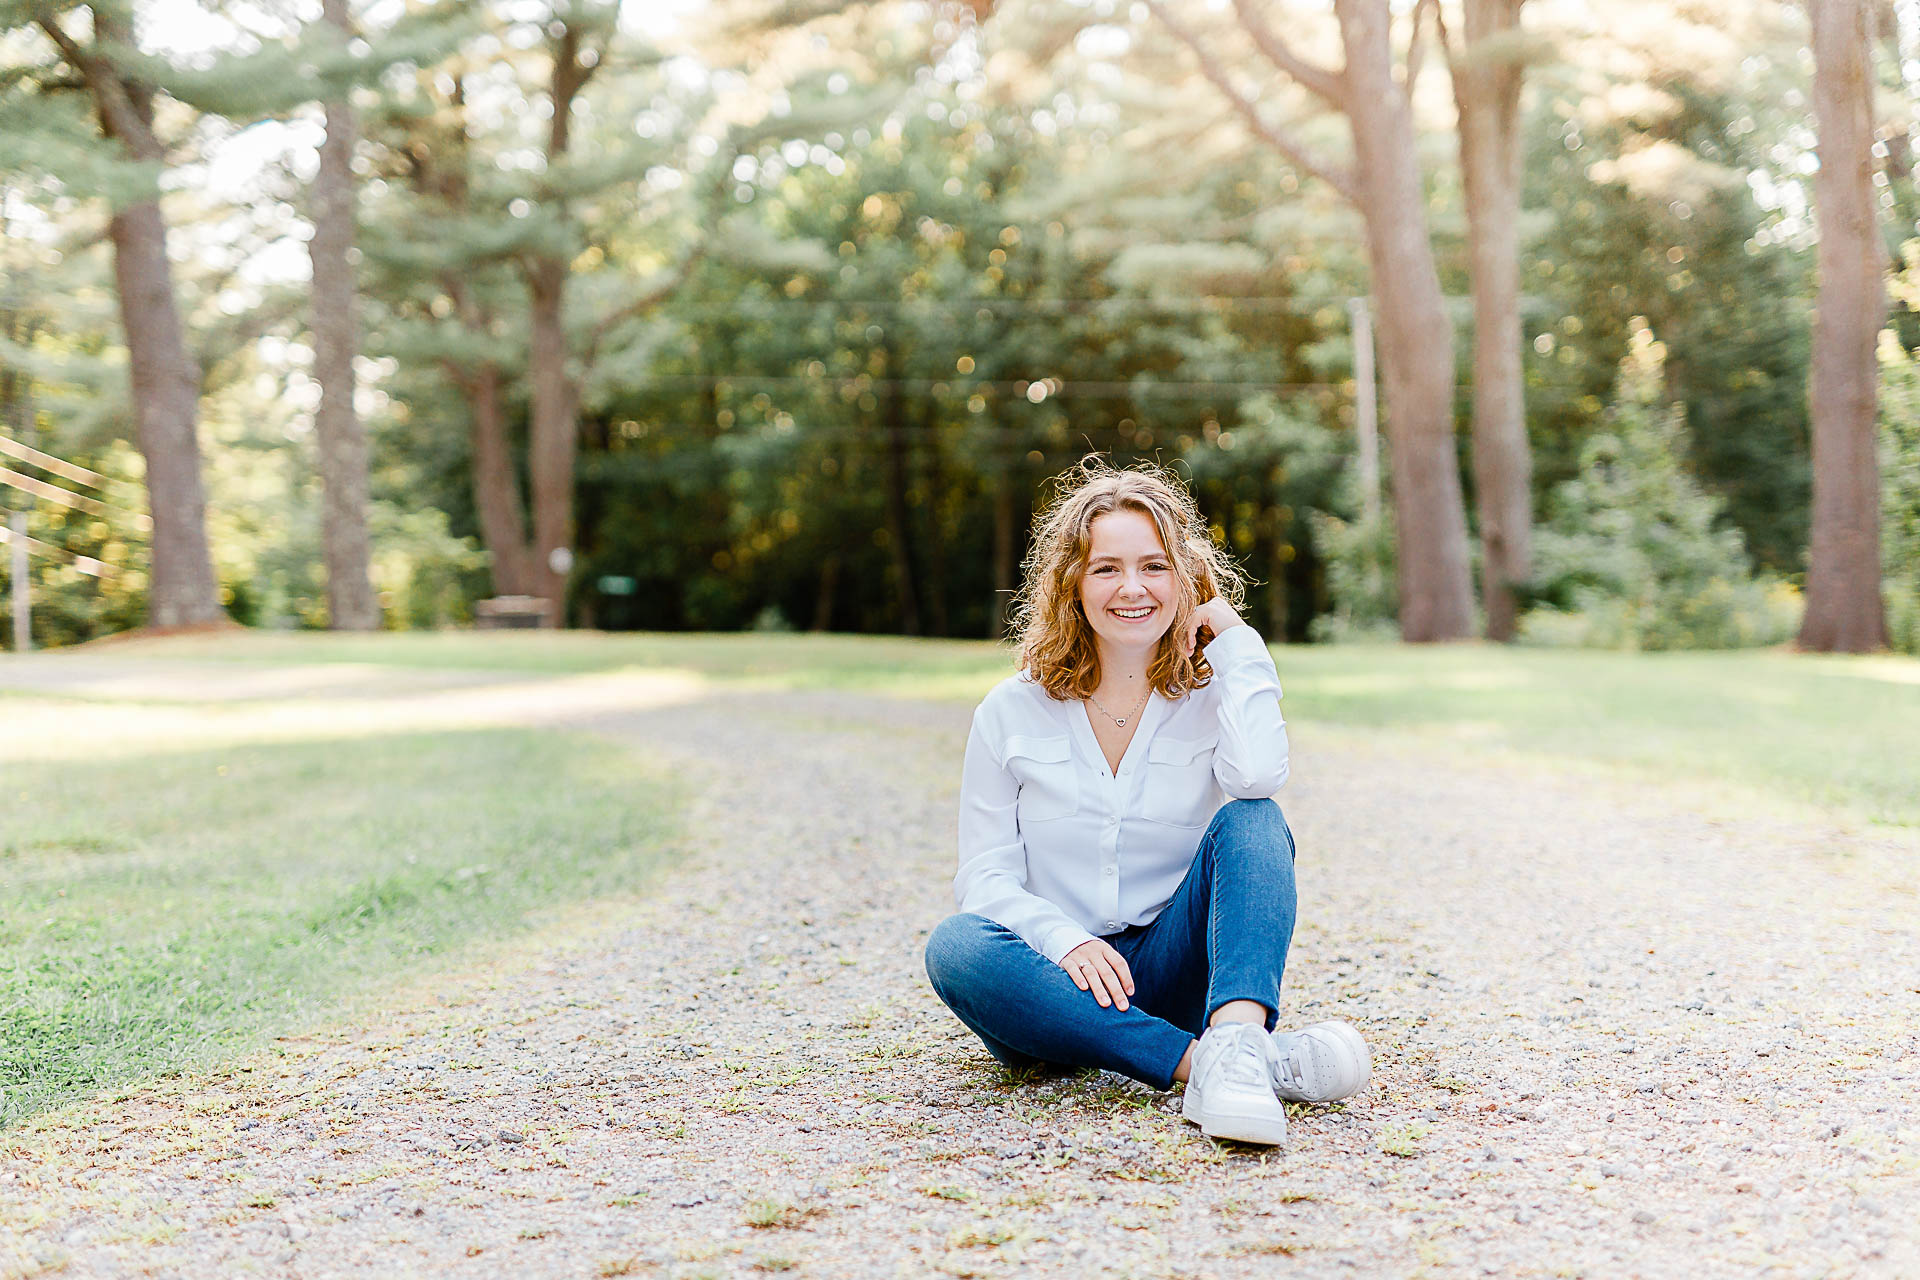 Photo by Scituate Senior Portrait Photographer Christina Runnals | High school senior girl sitting on a gravel road in a forest